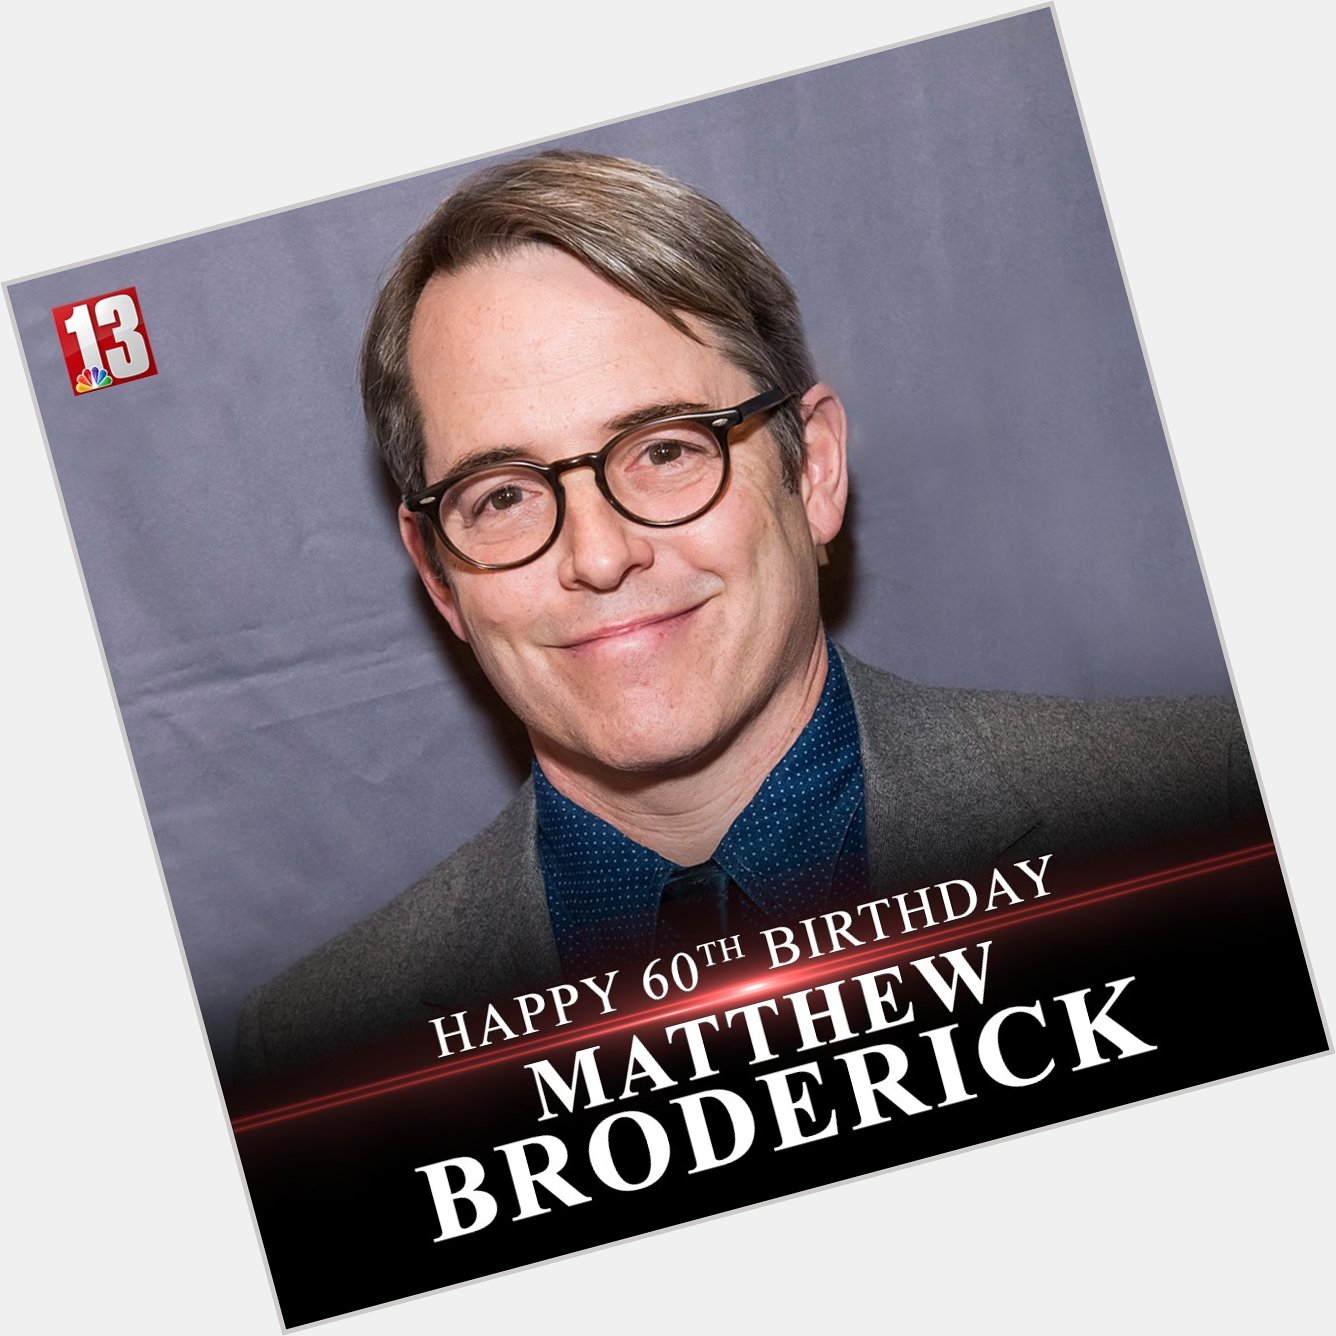   HAPPY BIRTHDAY! Matthew Broderick is *60* today! What\s your favorite role he\s had? 